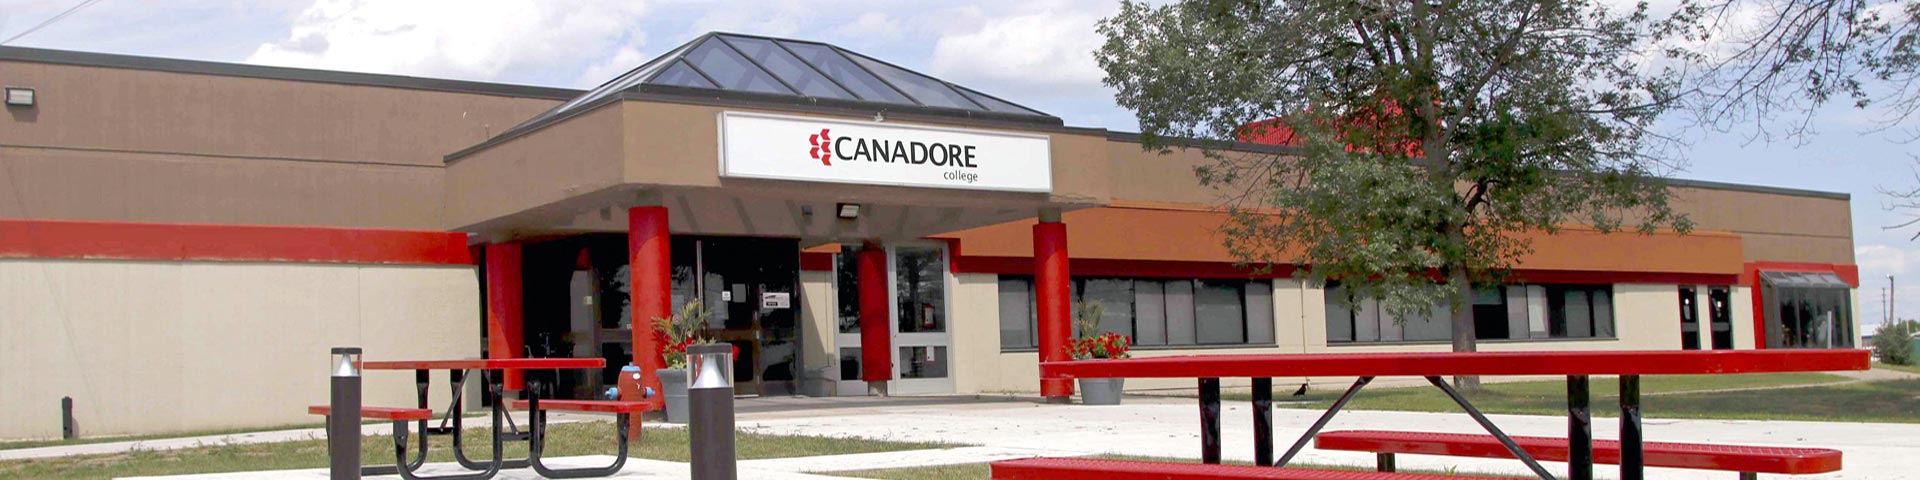 Apply Canadore college - Commerce Court